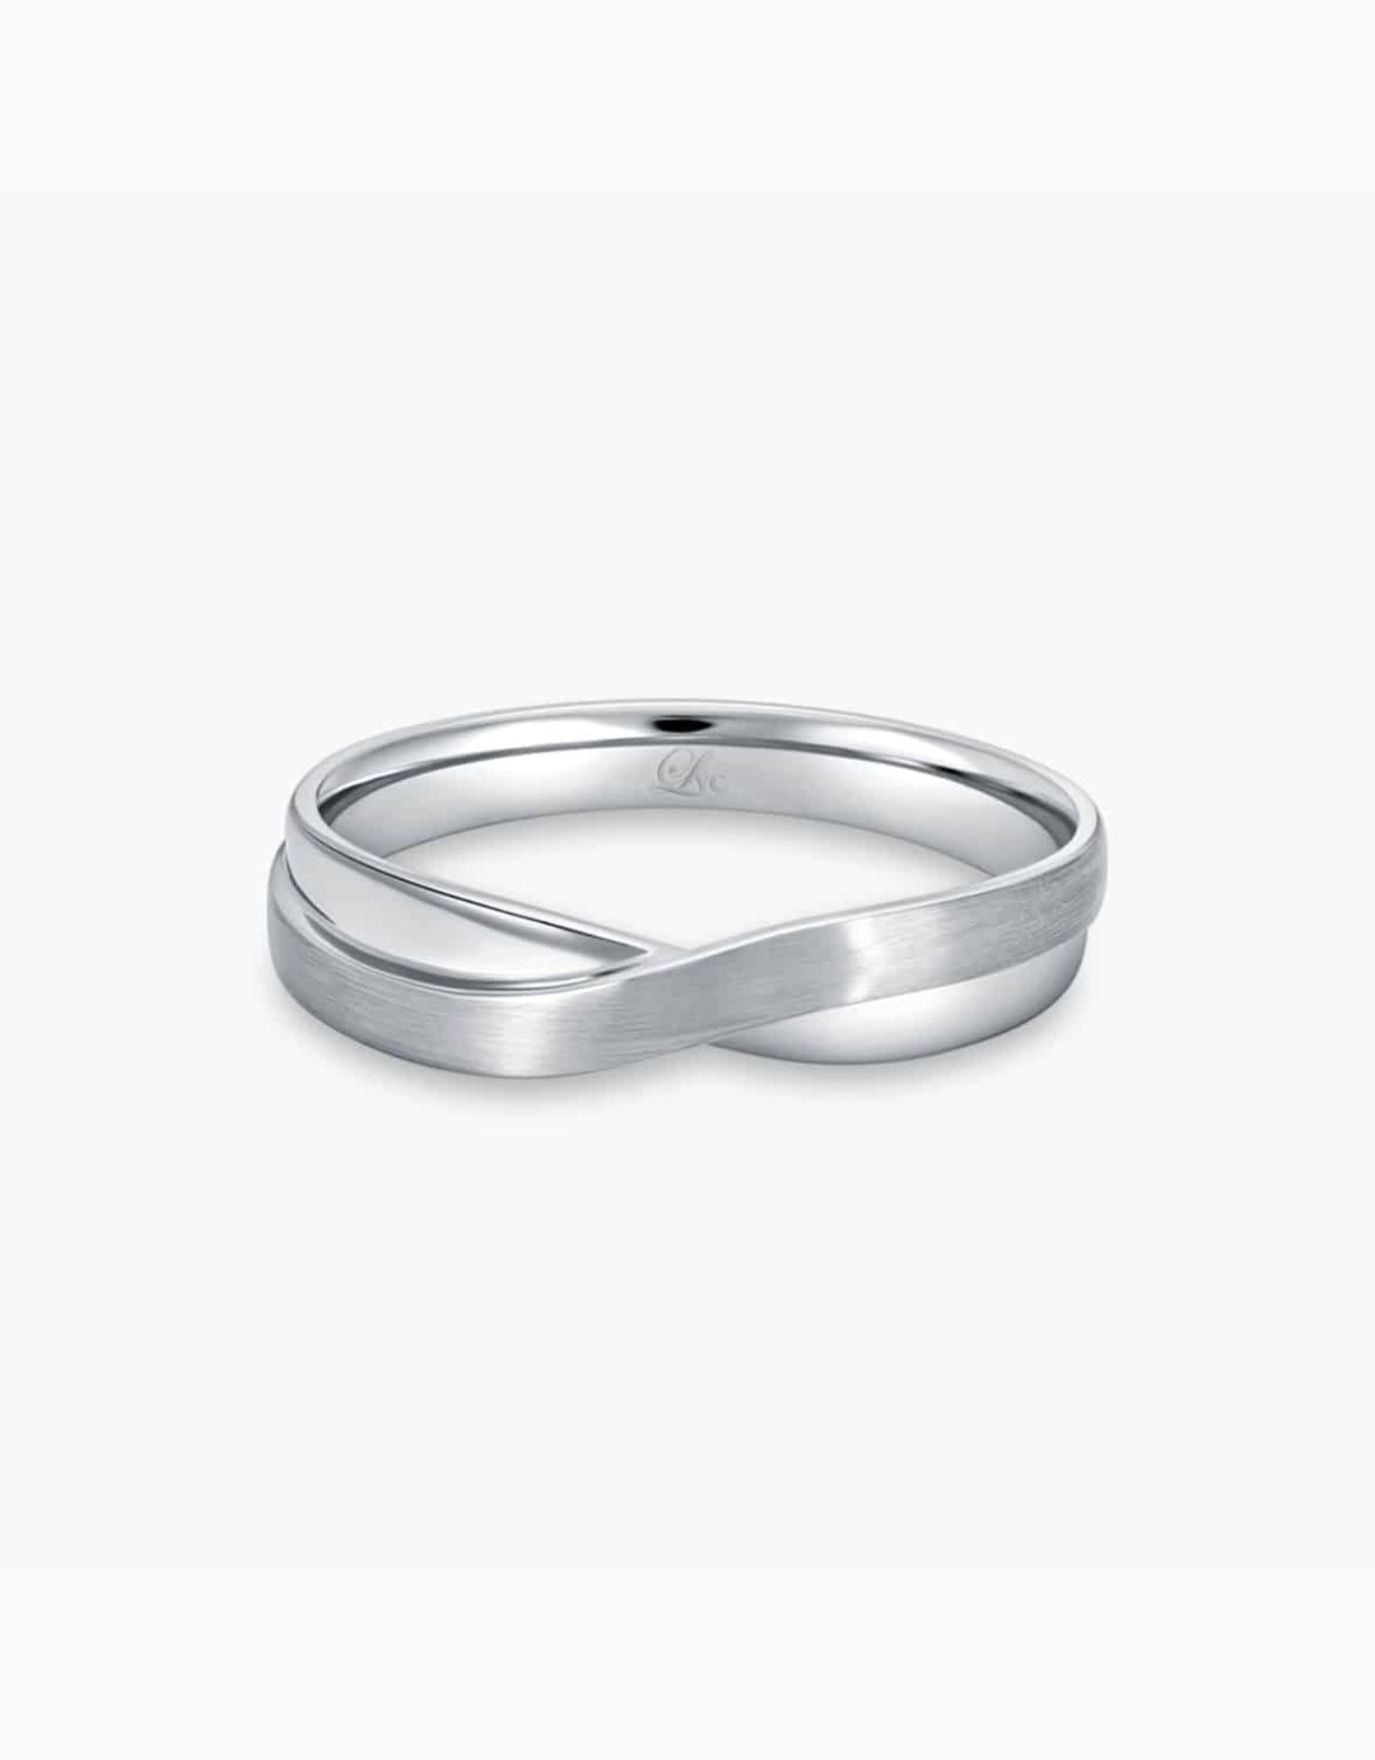 LVC Desirio Cross Wedding Band in White Gold with Dual Mixed Finish